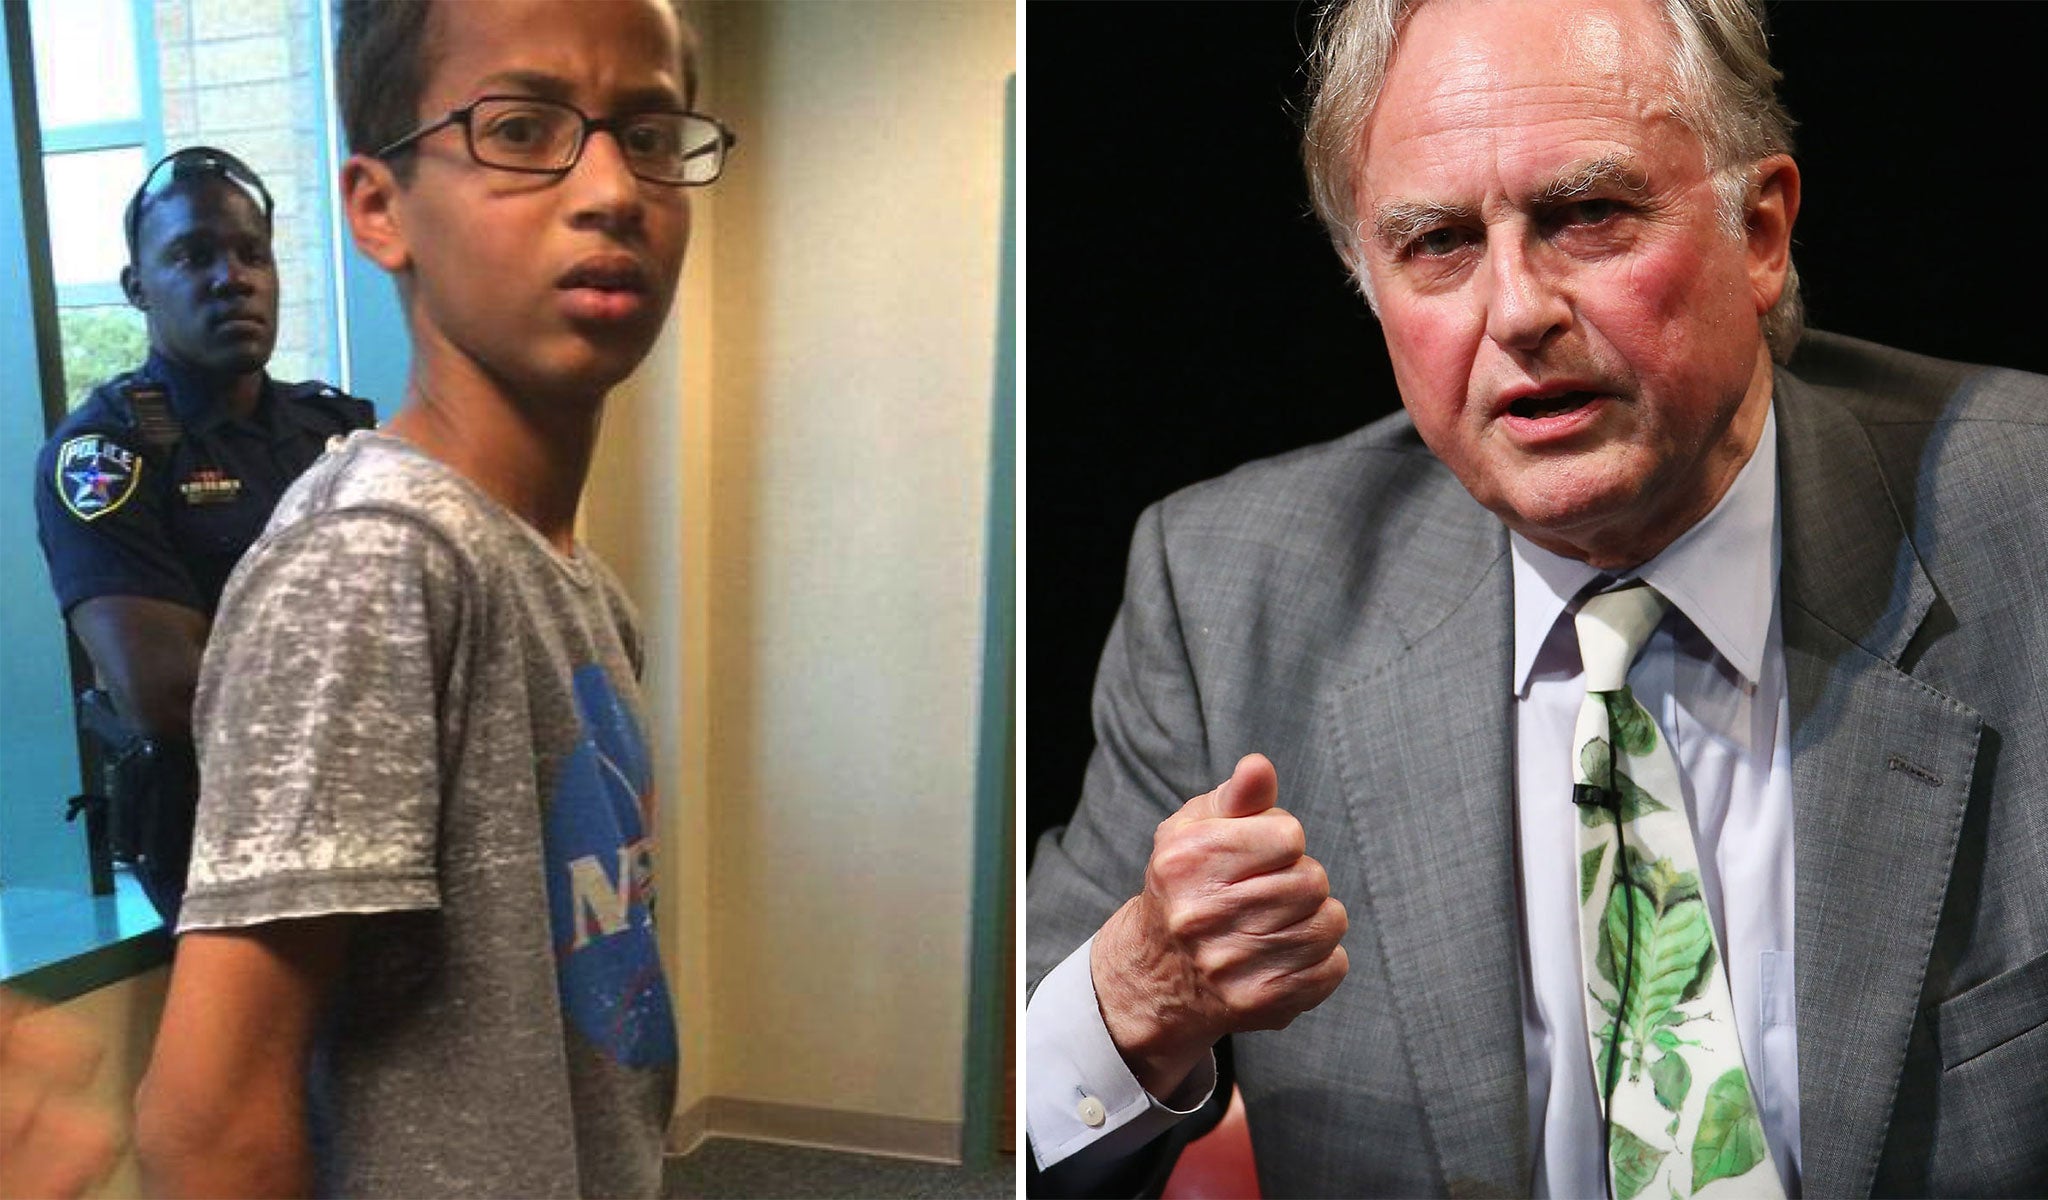 Richard Dawkins suggested Ahmed Mohamed was old enough to take responsibility for suing his American school